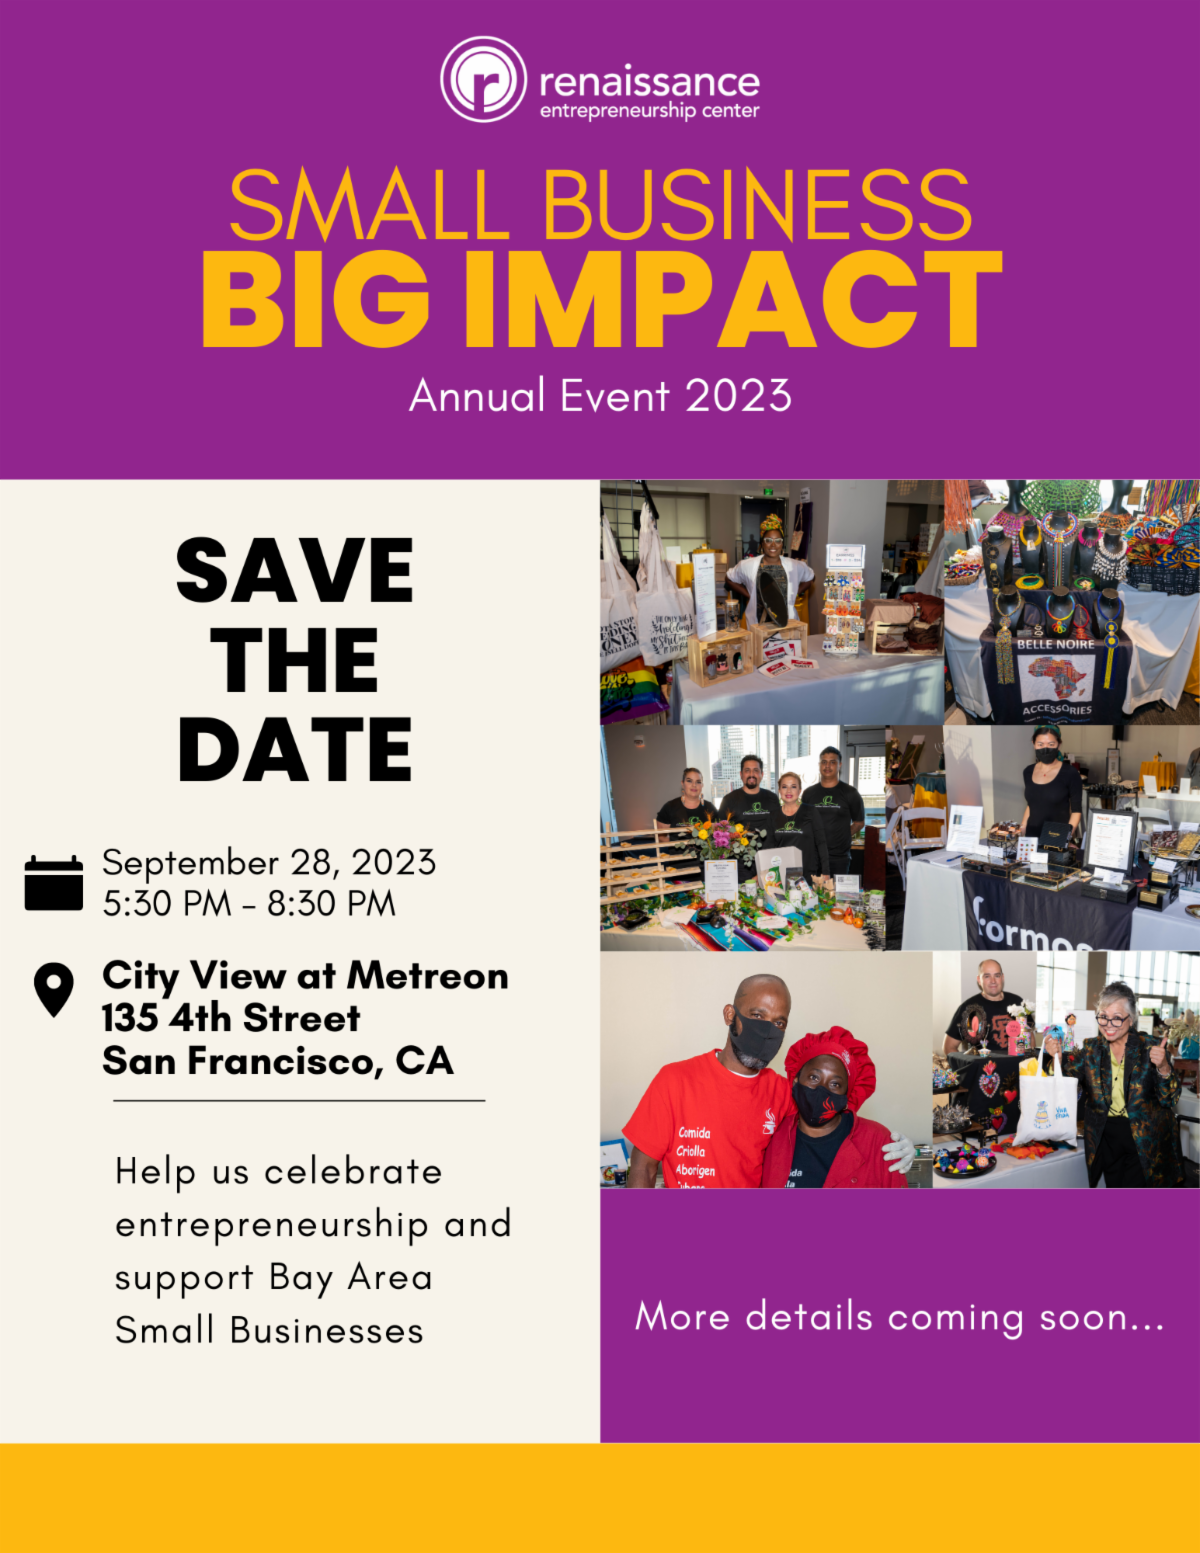 Small Business Big Impact Annual Event 2023